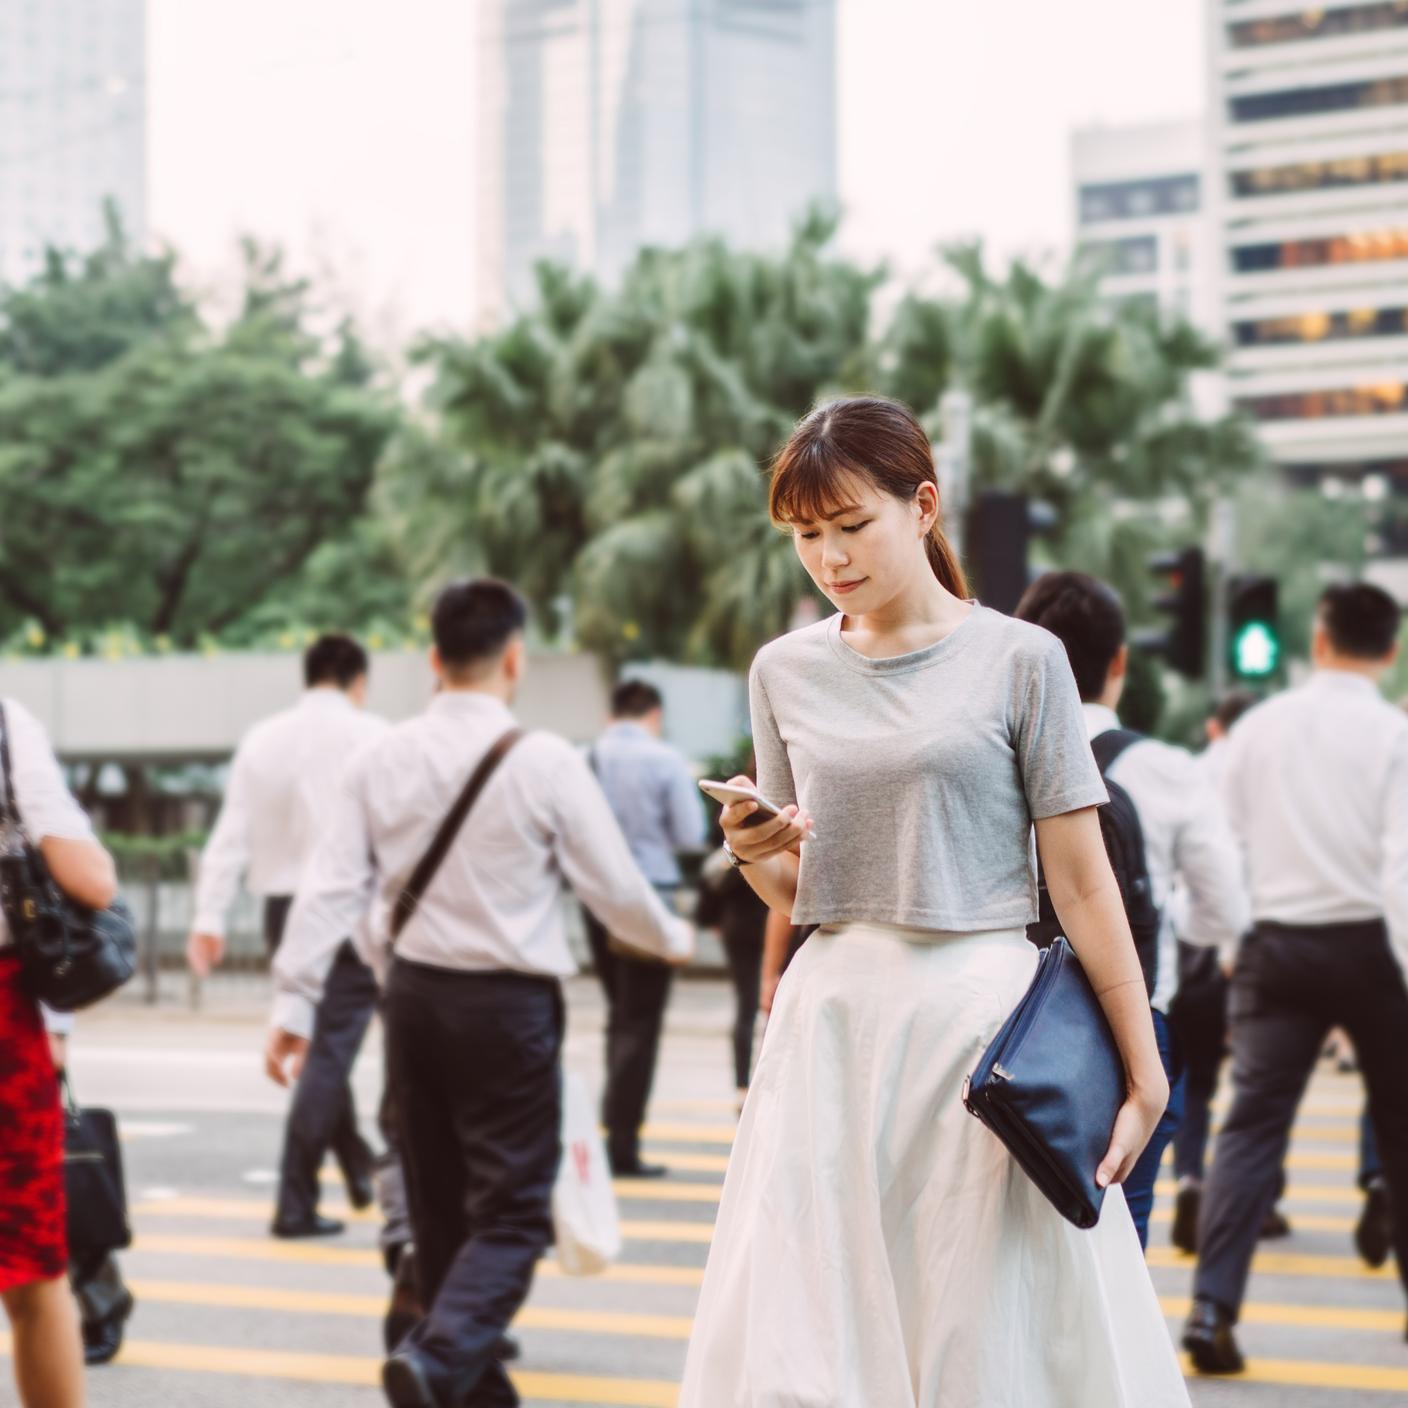 woman using mobile in busy city environment